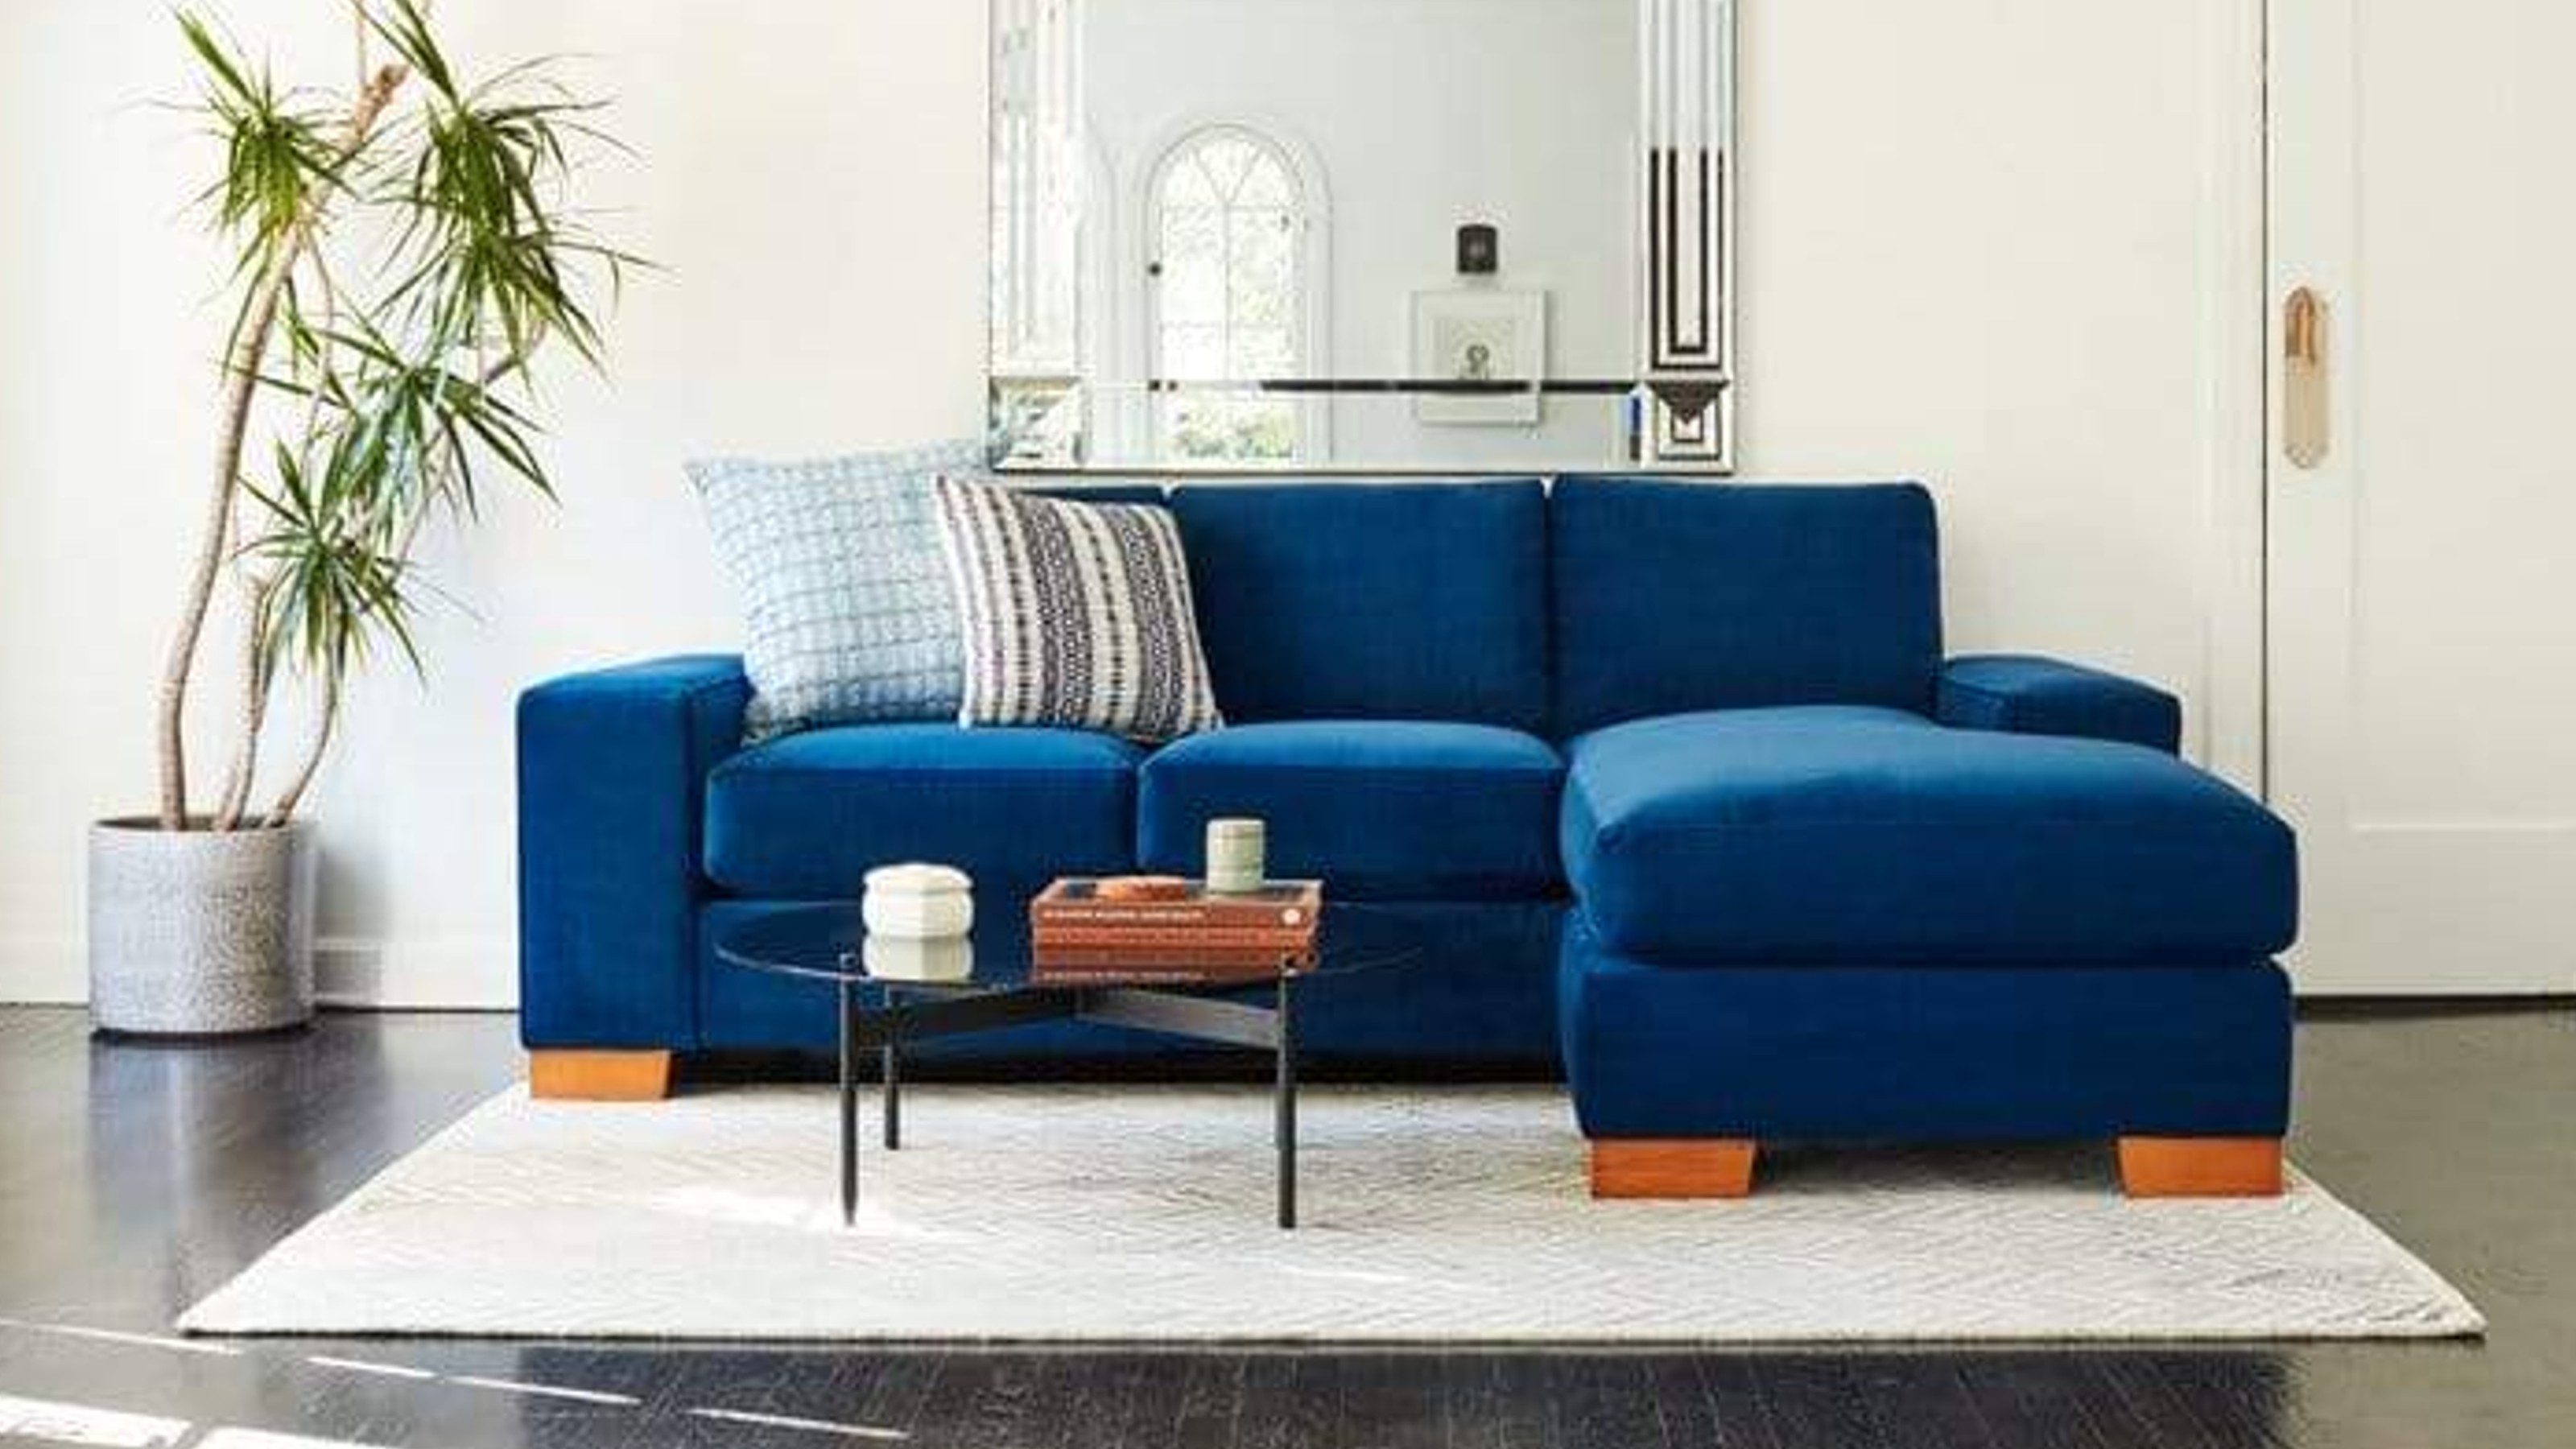 Best Sleeper Sofas 2022 The Sofa, Best Small Sofa Bed Canada